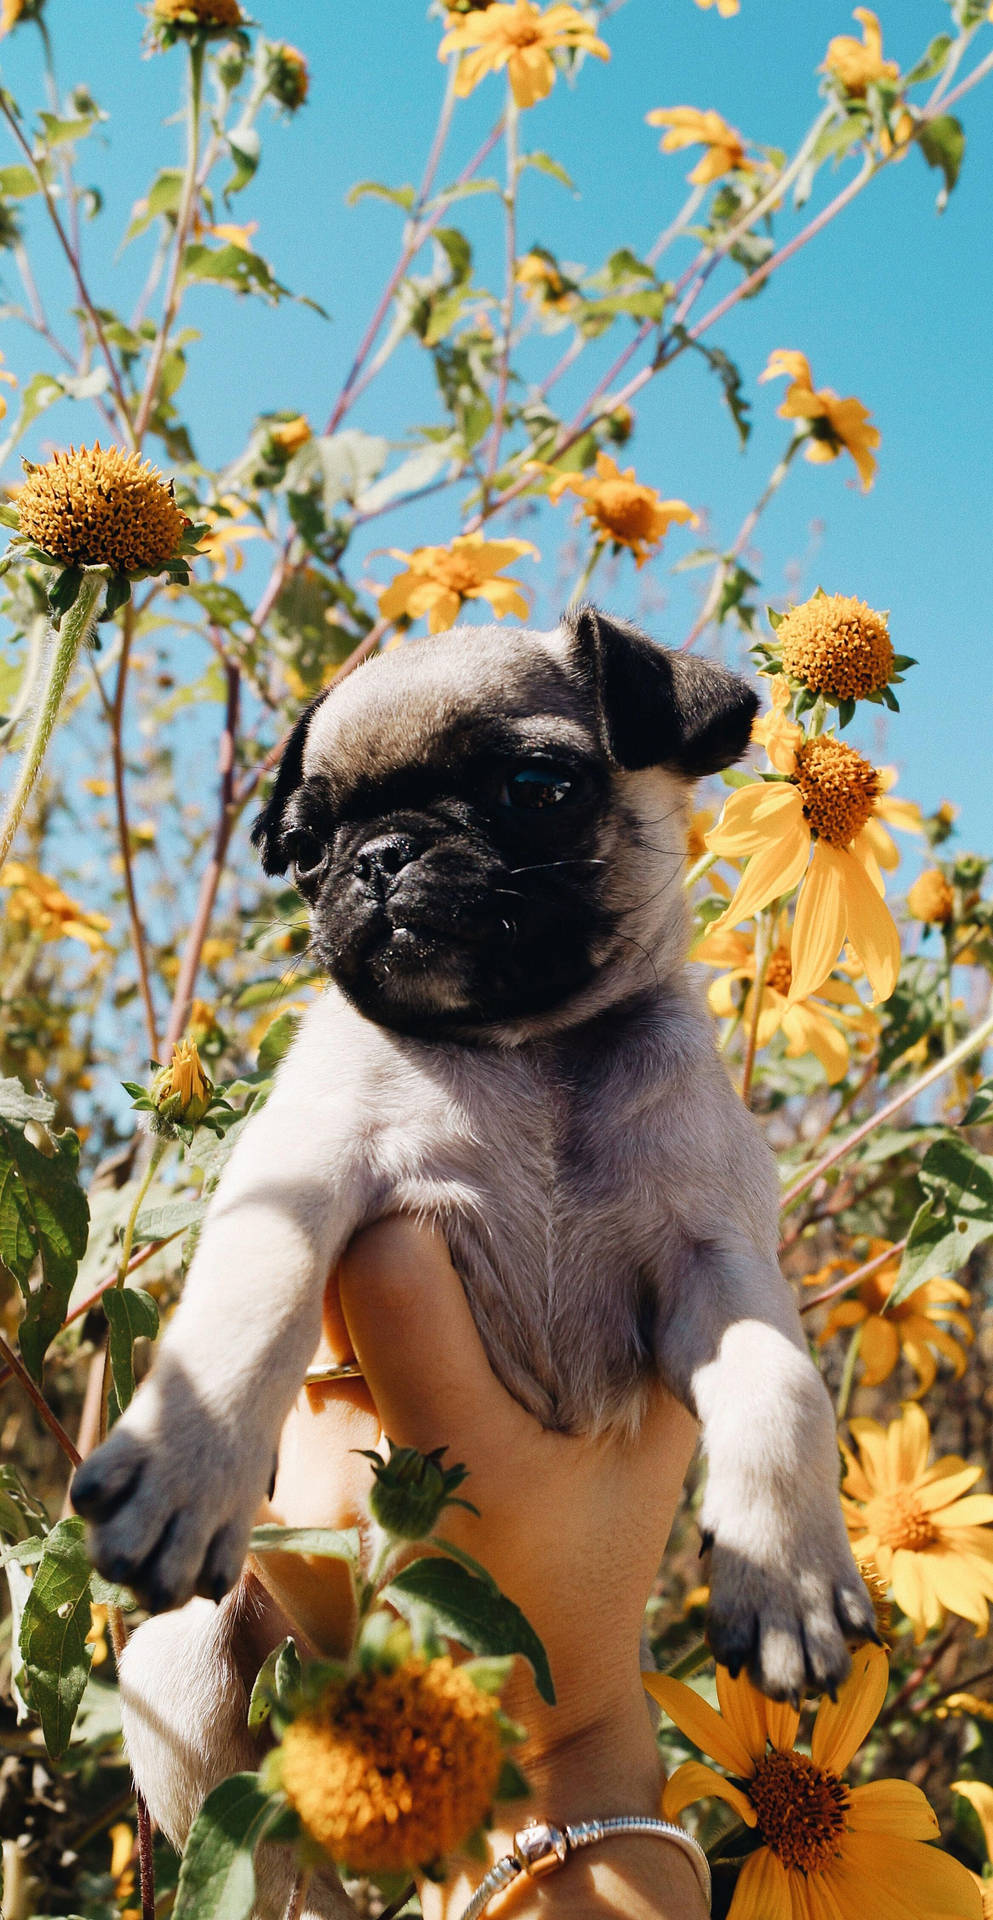 Sun-loving Cutie -a Pug Pup And His Sunflowers